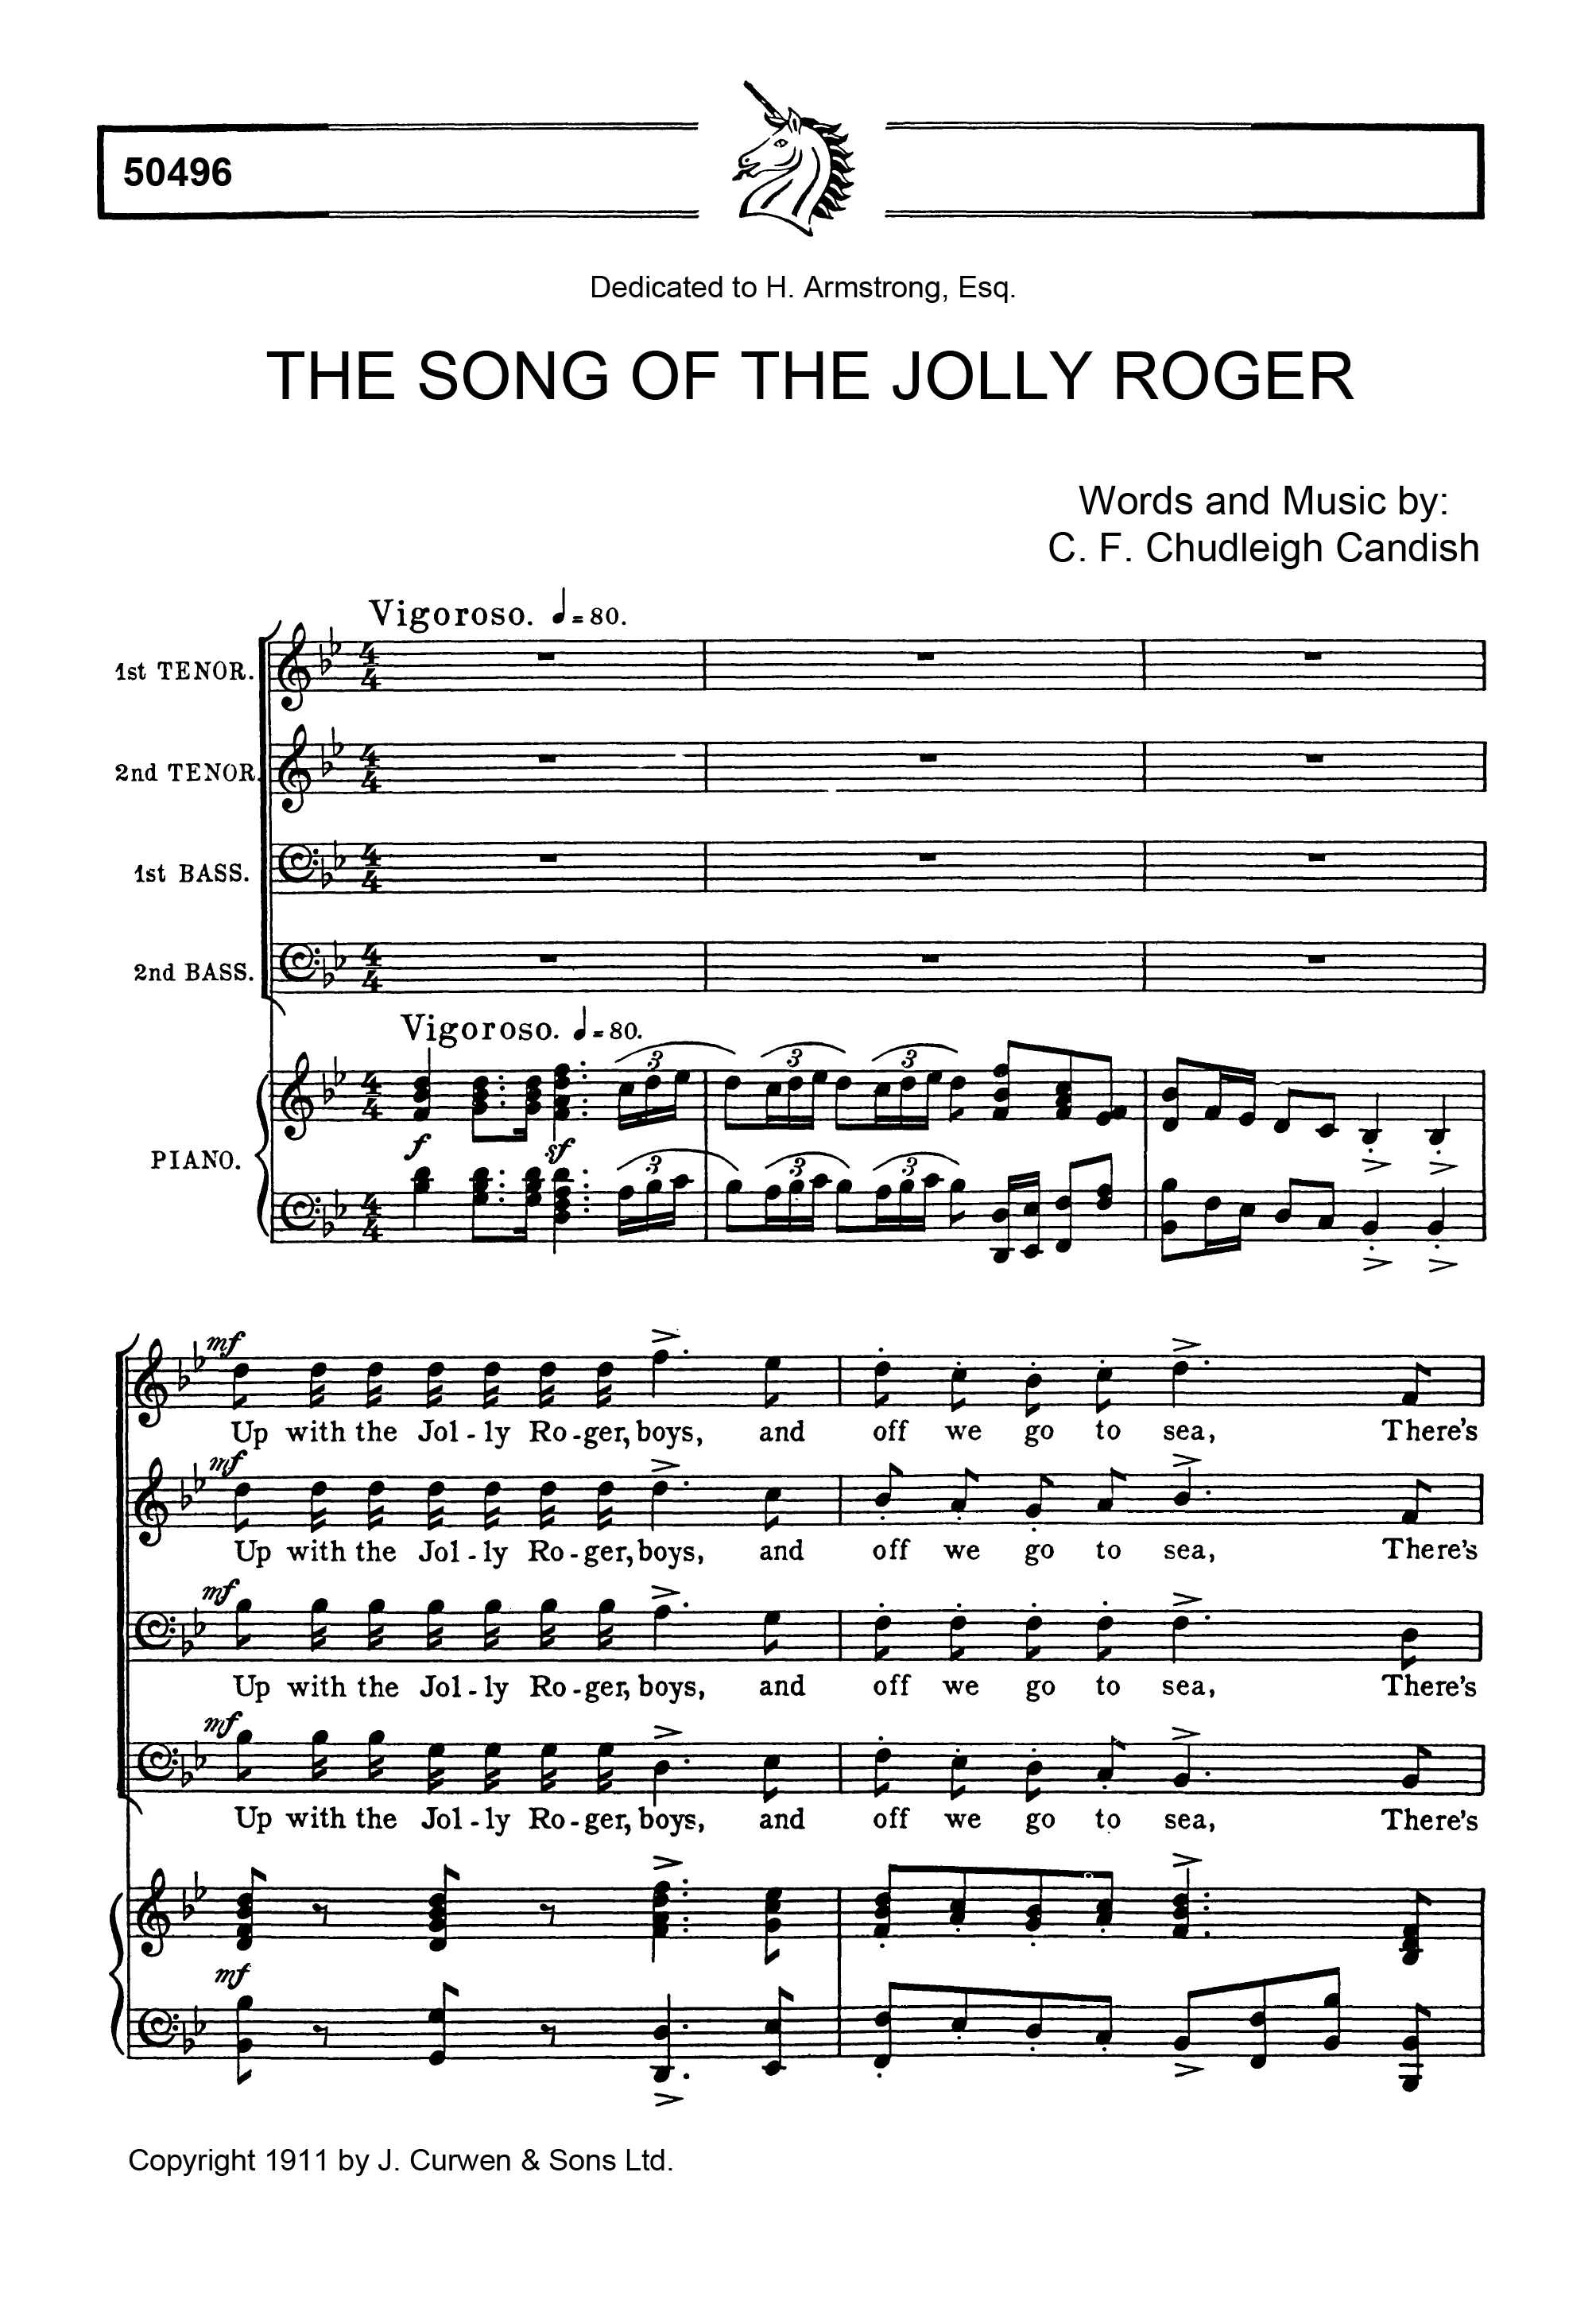 C.F. Chudleigh Candish: The Song Of The Jolly Roger: TTBB: Vocal Score